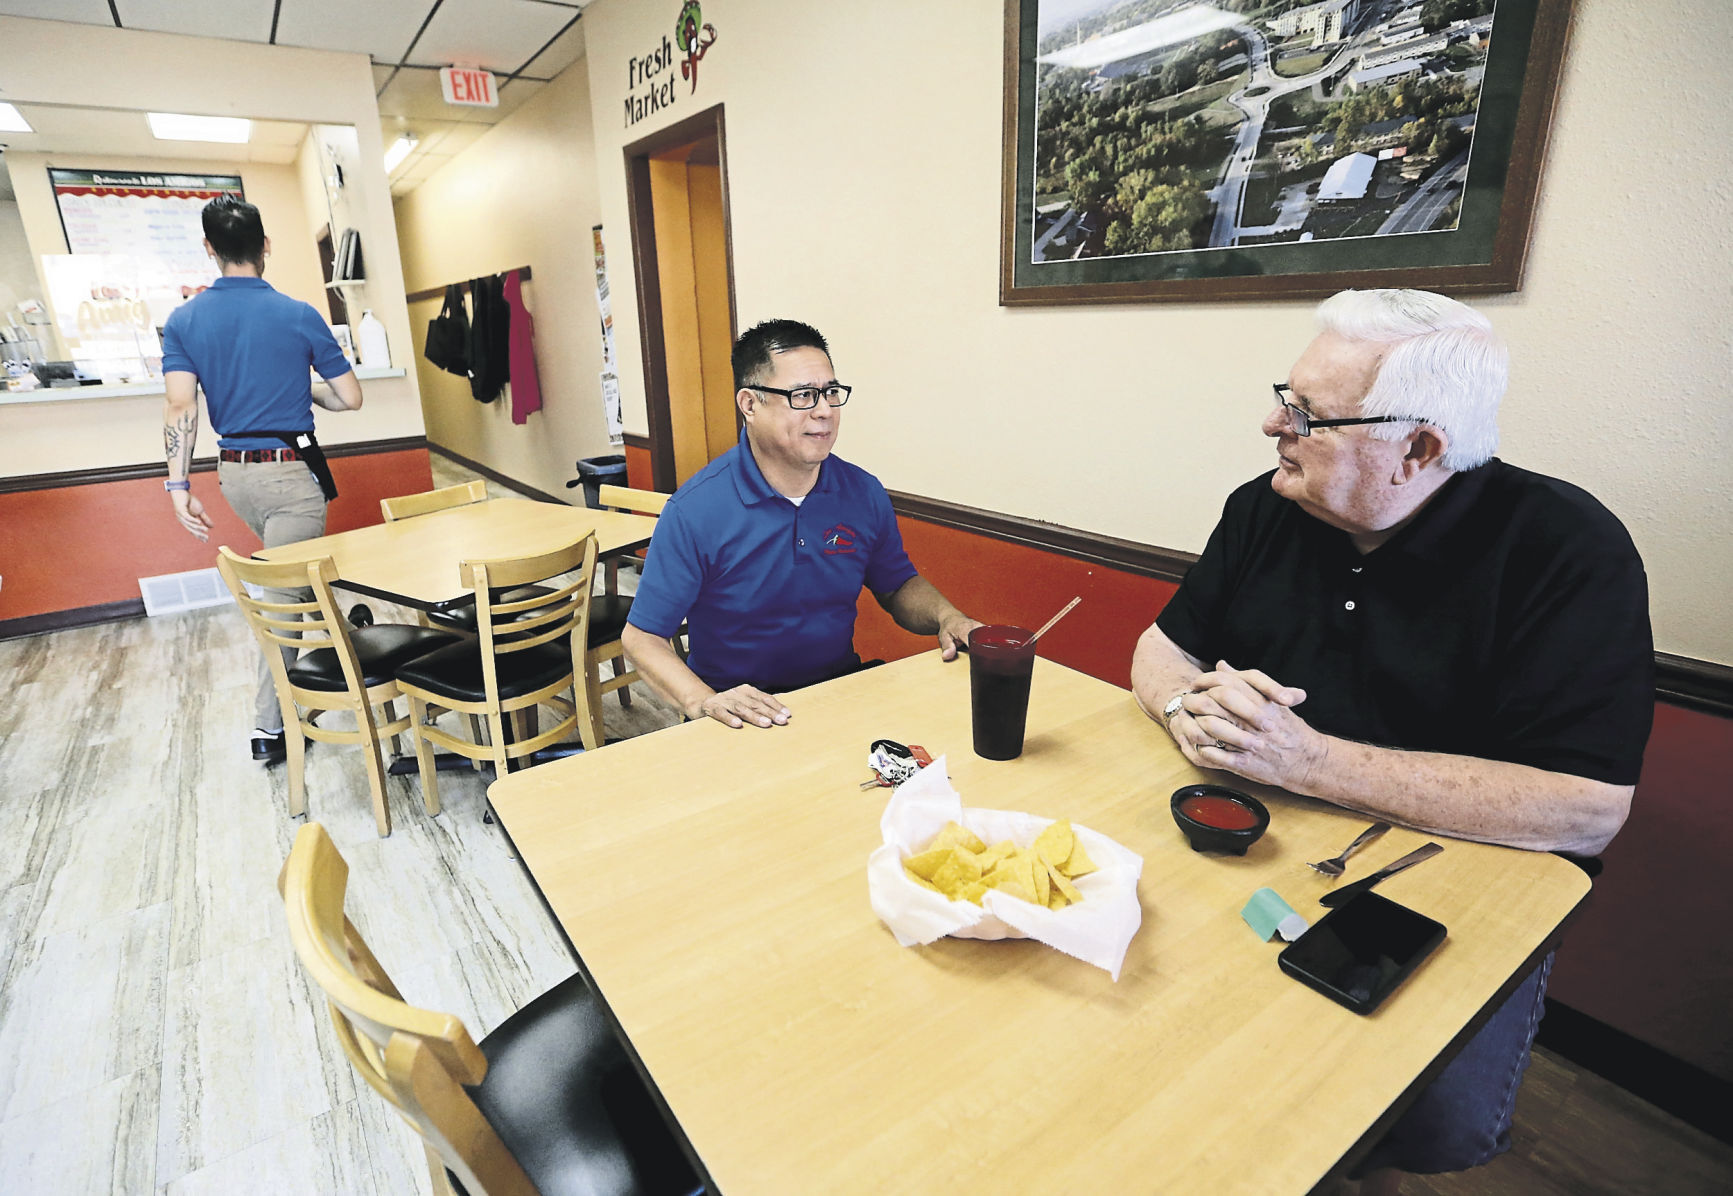 Owner Carlos Vasquez (left) talks with Jack Luedtke, of Dubuque, at Los Amigos in Platteville, Wis. Hispanic-owned establishments have provided positive economic and cultural influences in communities throughout the tri-state area.    PHOTO CREDIT: JESSICA REILLY